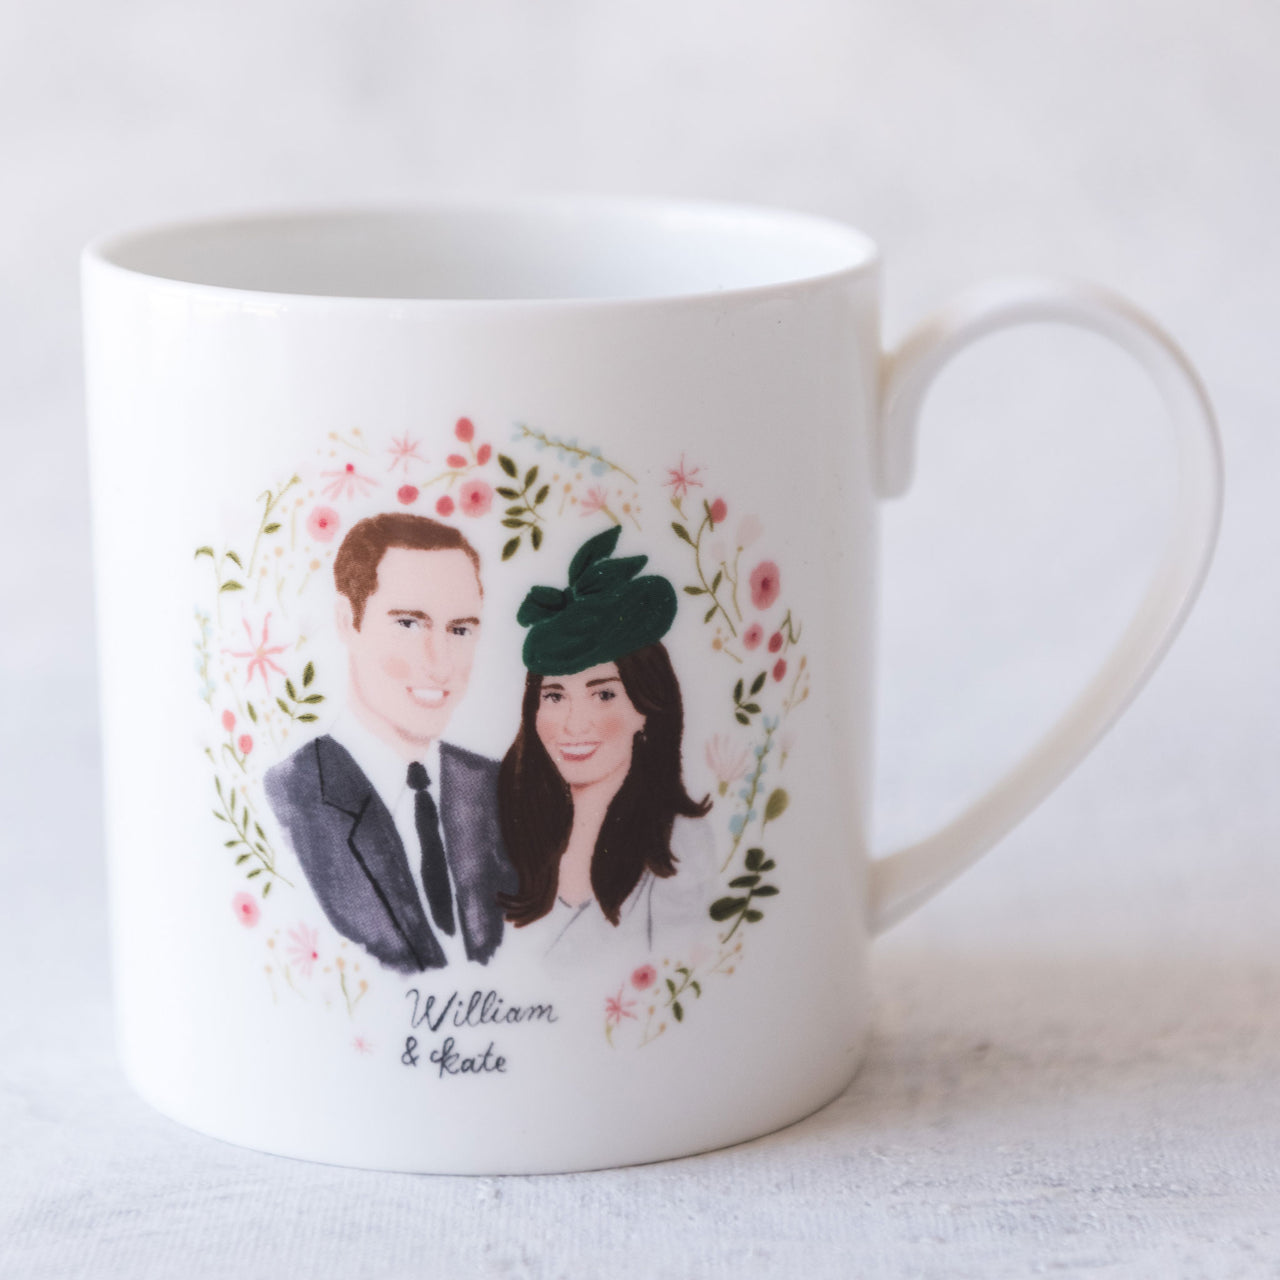 William & Kate illustrated on a mug to celebrate their marriage